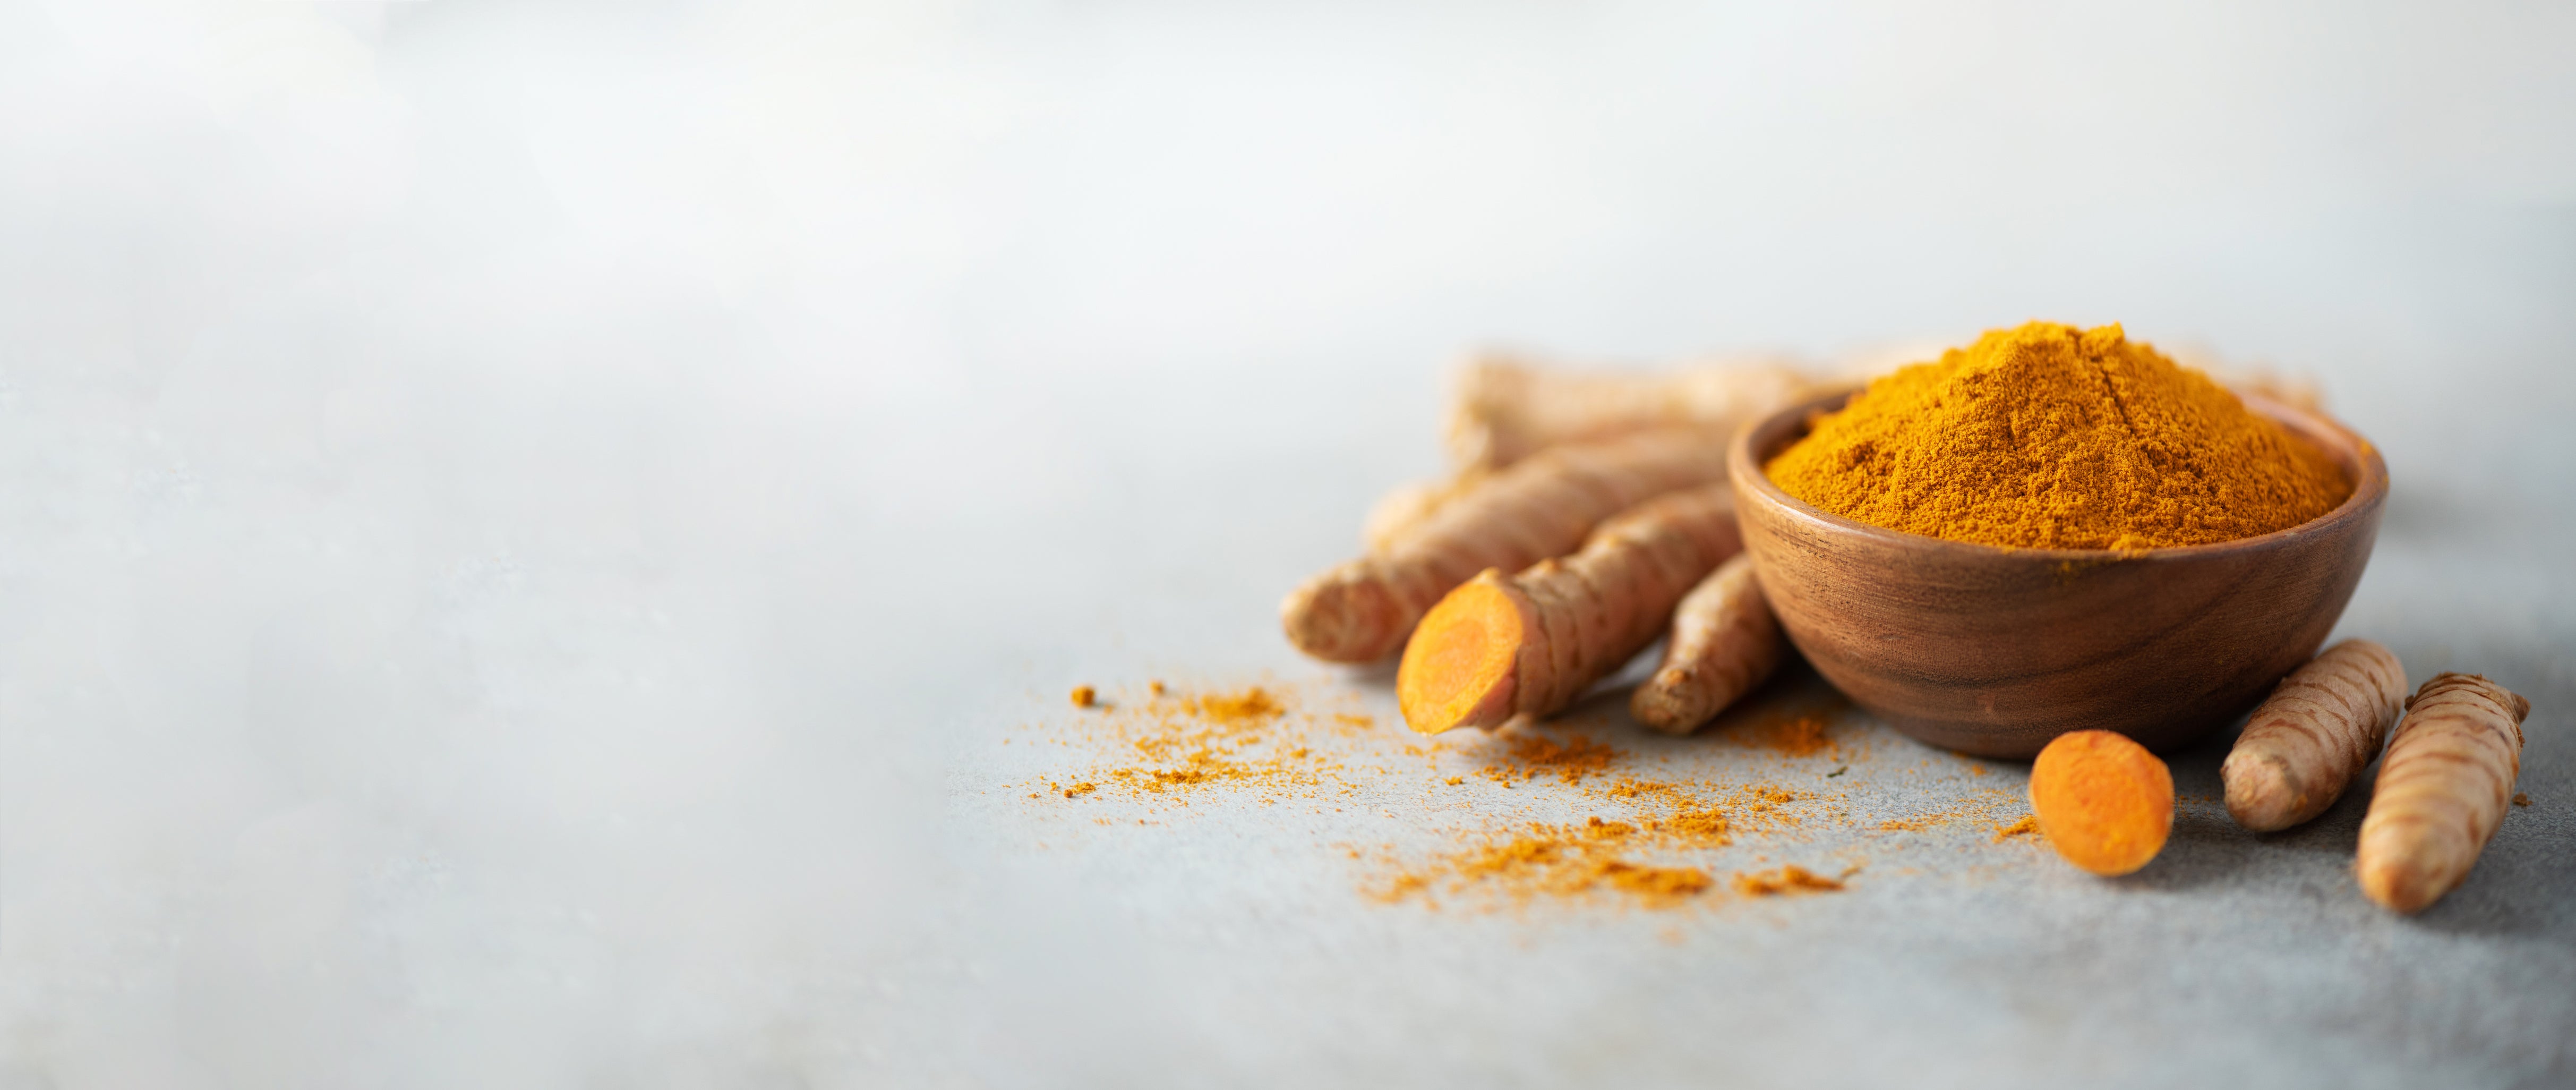 Turmeric: Spice up your routine with this superfood ingredient